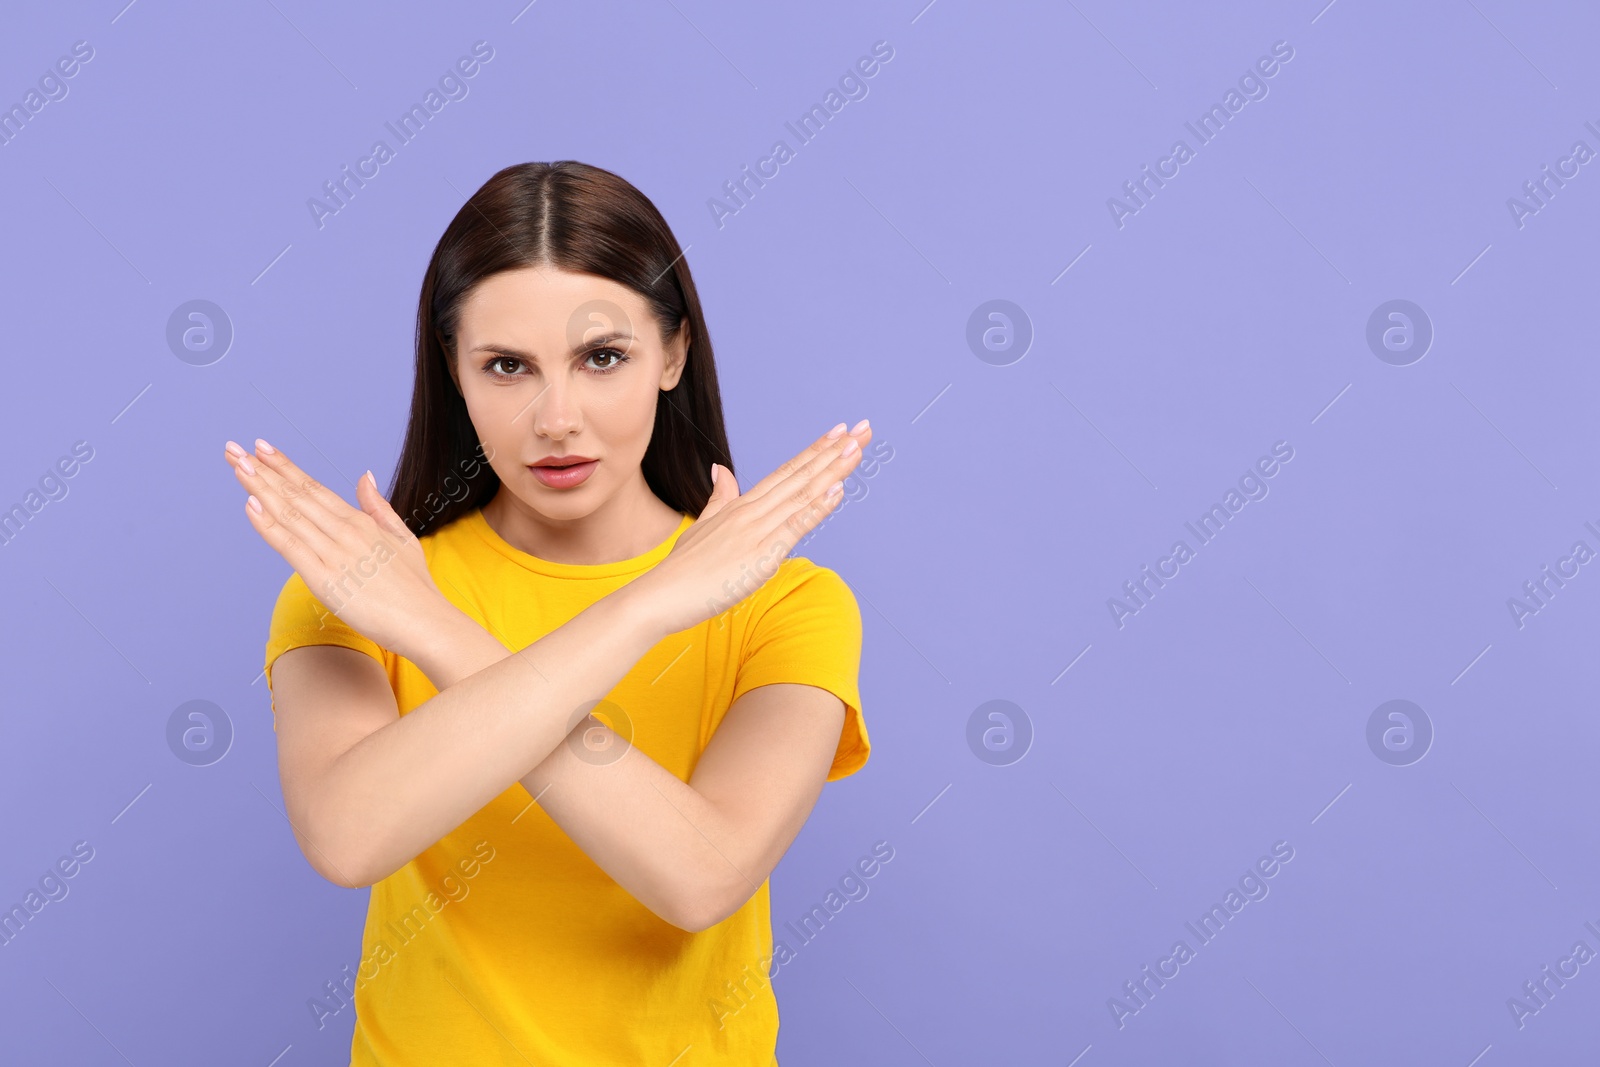 Photo of Stop gesture. Woman with crossed hands on violet background, space for text